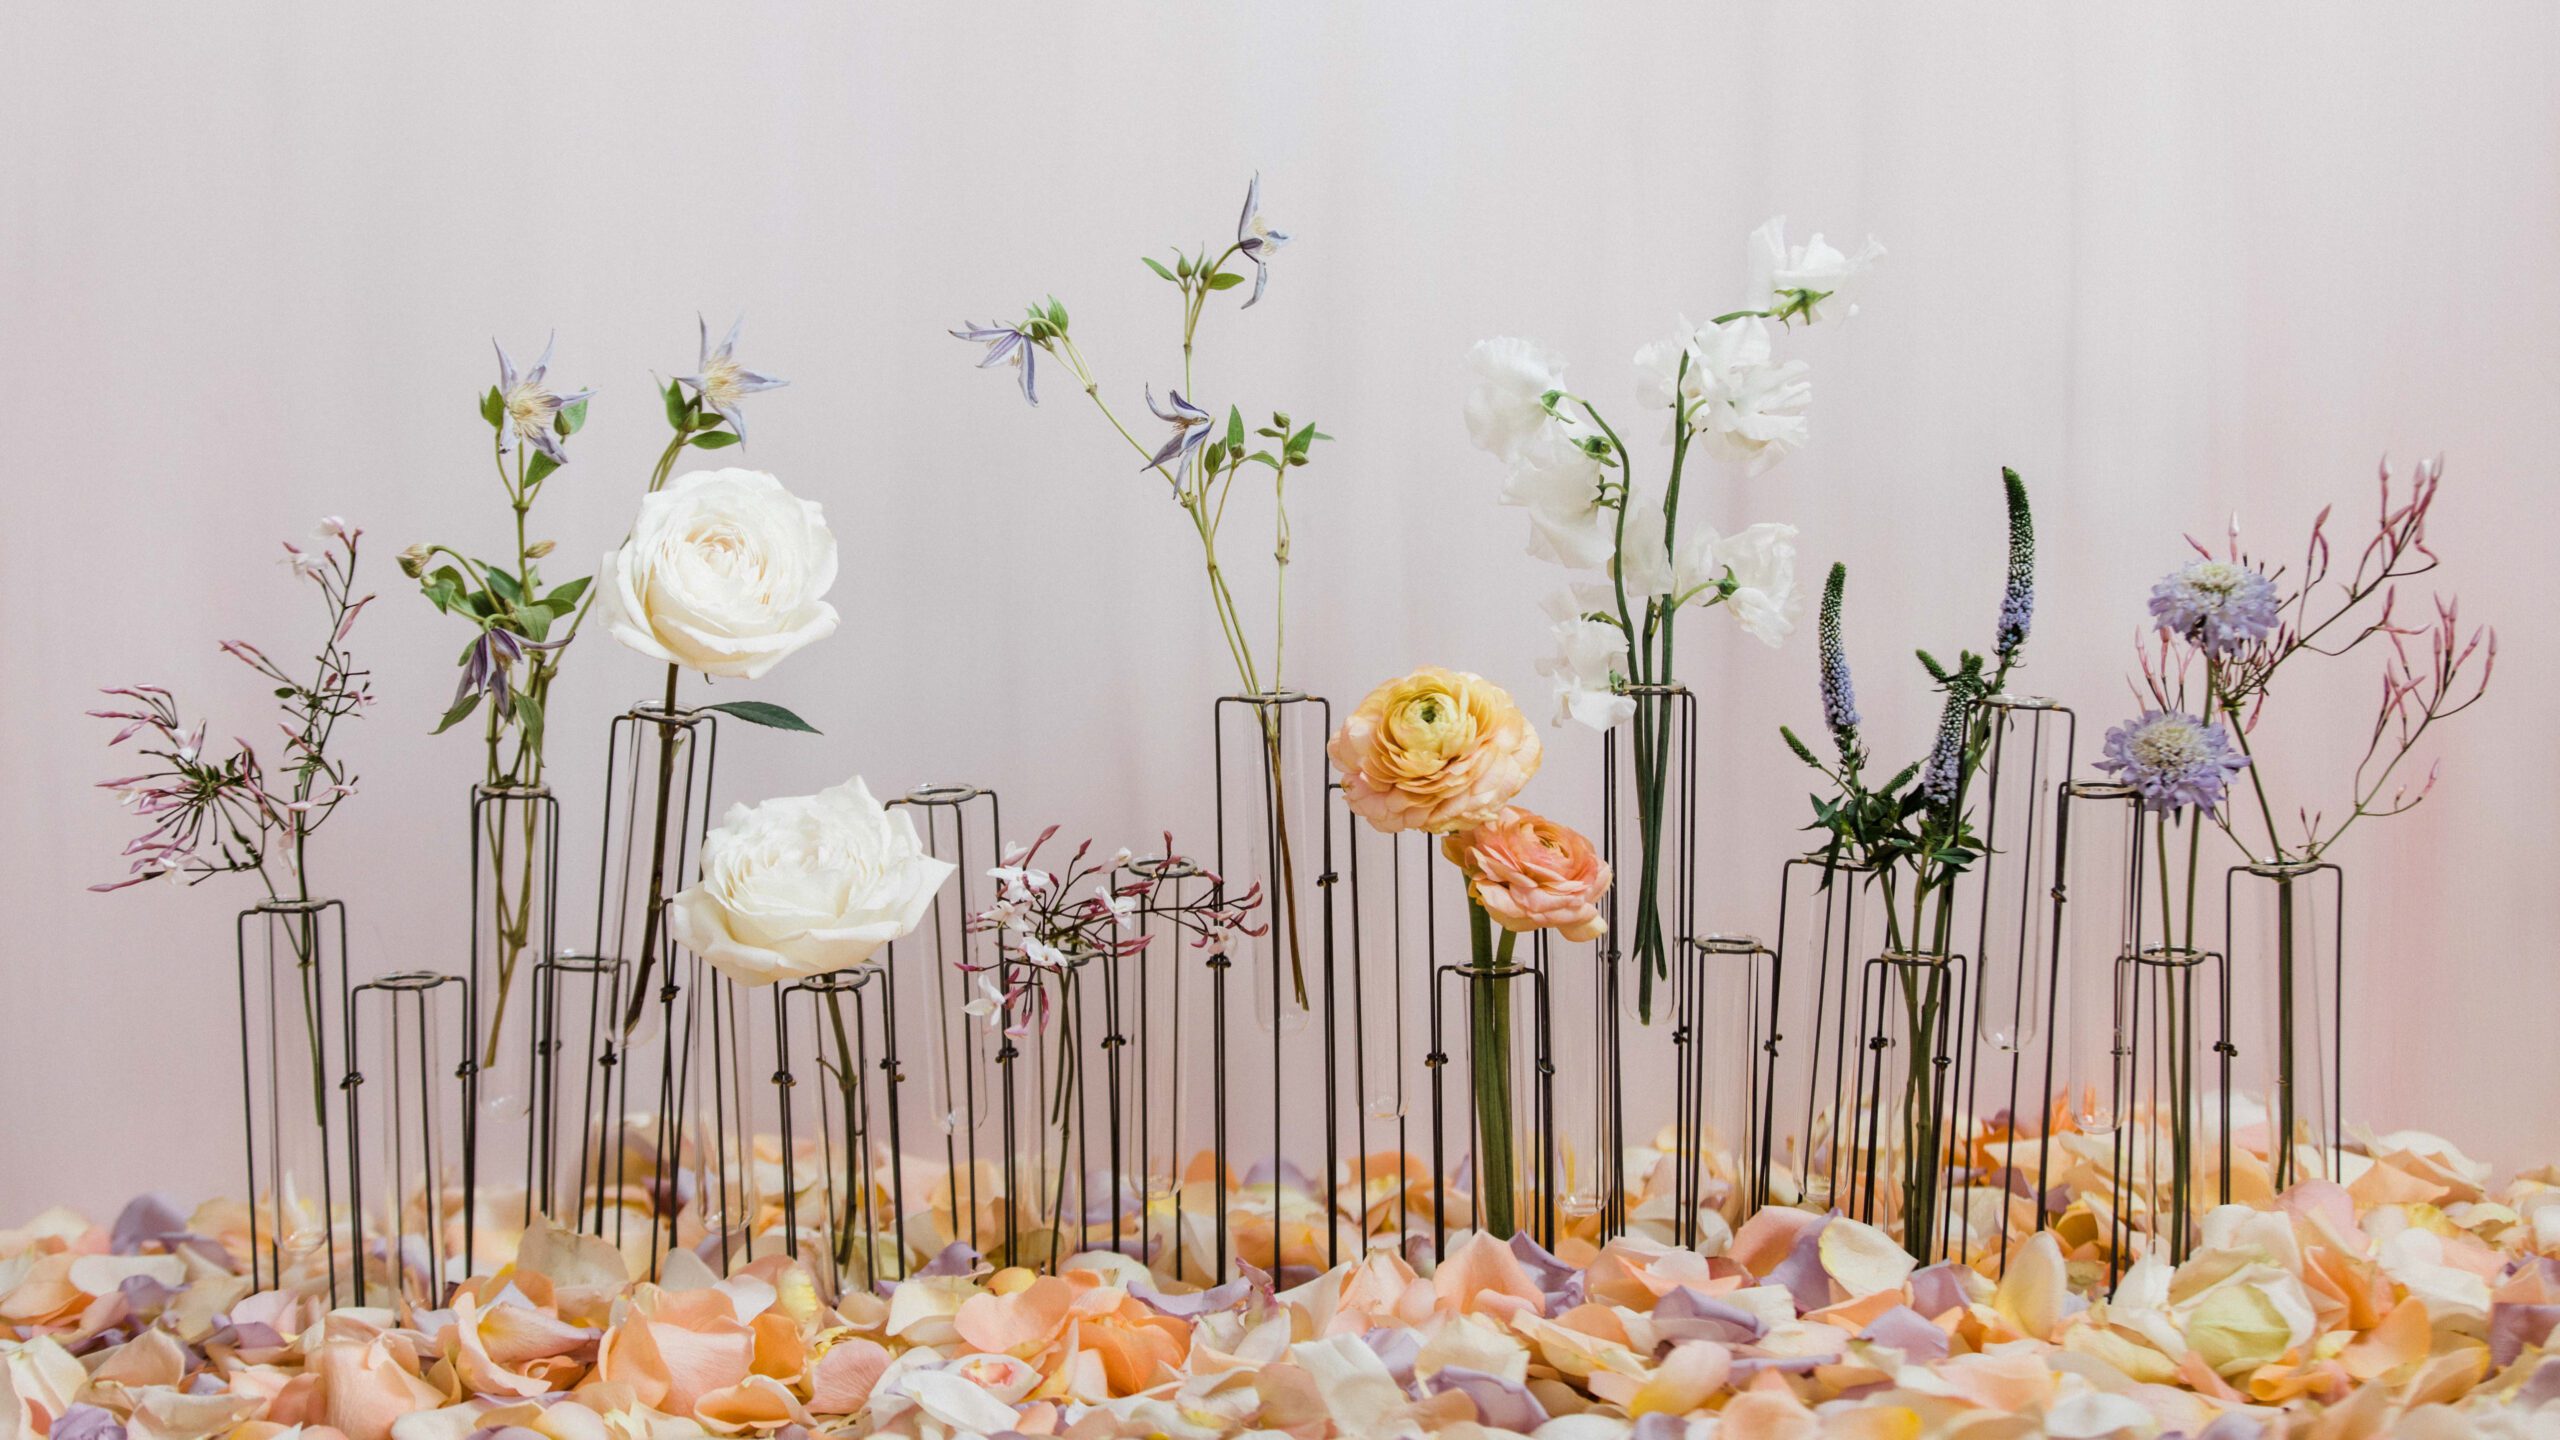 A photograph of a modern flower display for a business brand photoshoot